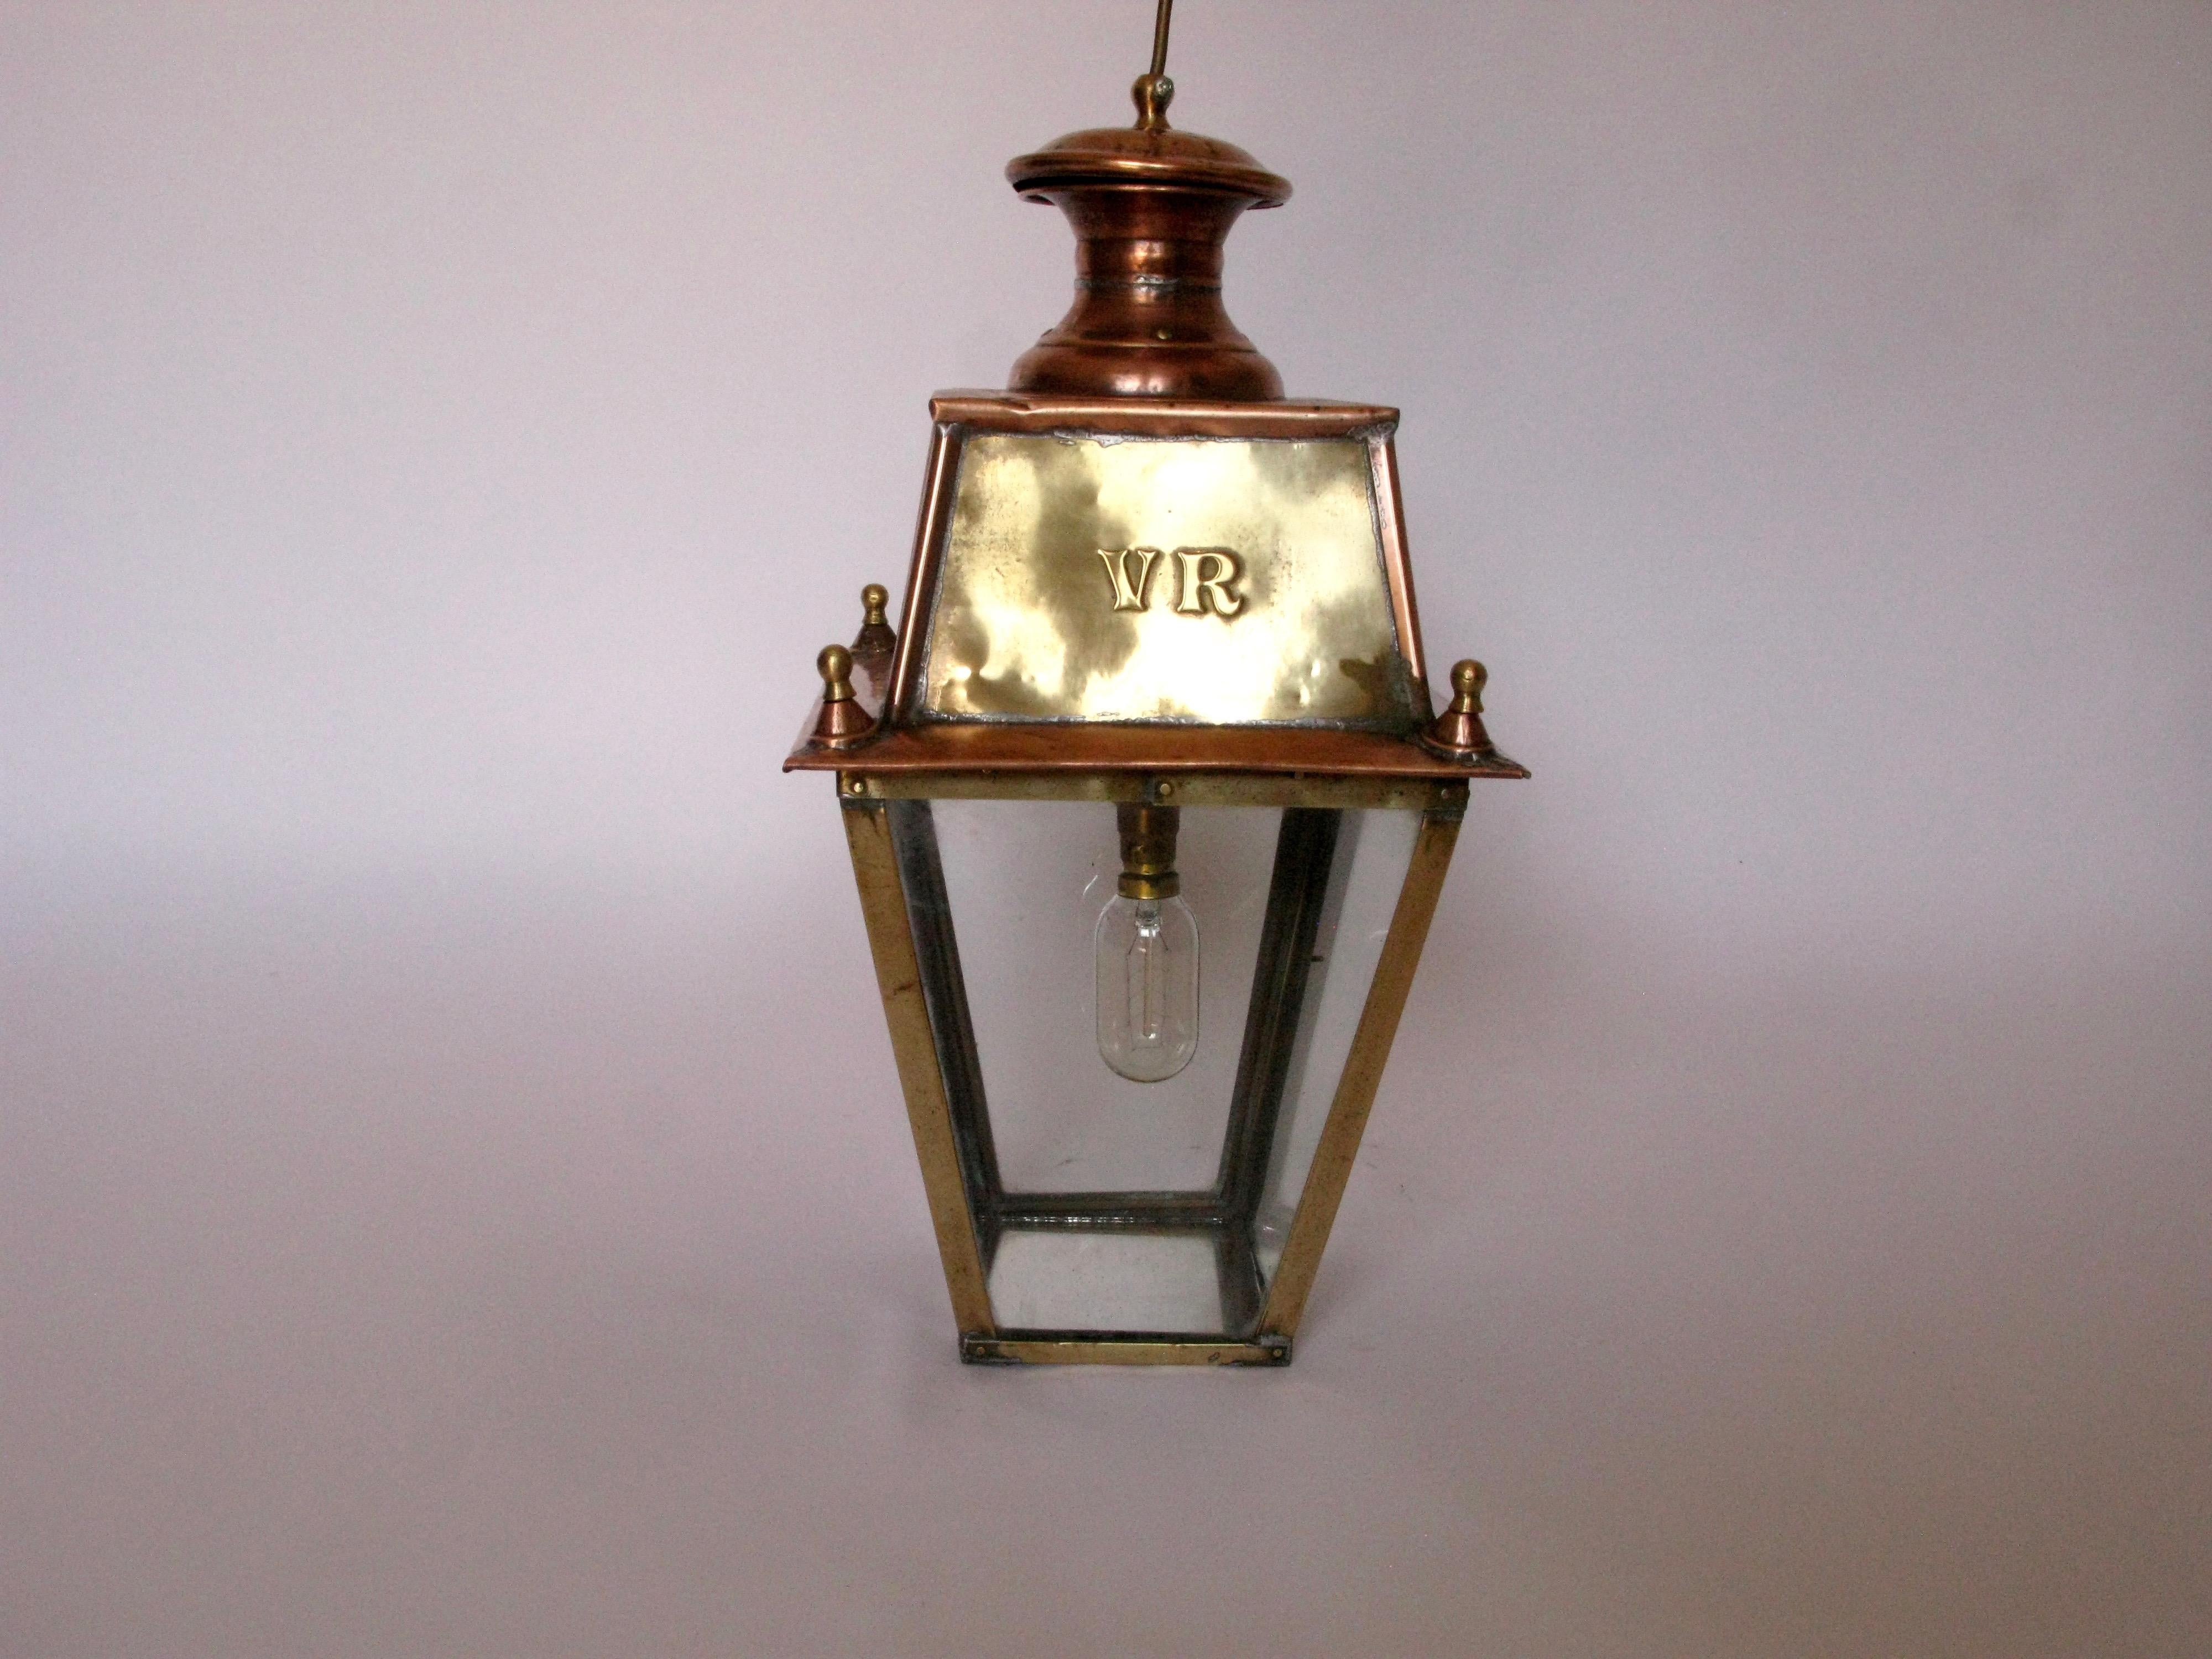 Lovely Classic old copper decorative Lantern piece for hallway, entrance, or f.e above the kitchen table or in a stable and or barn
Very decorative original piece, old copper polished
Has a small mirror inside underneath
Marked VR.

  